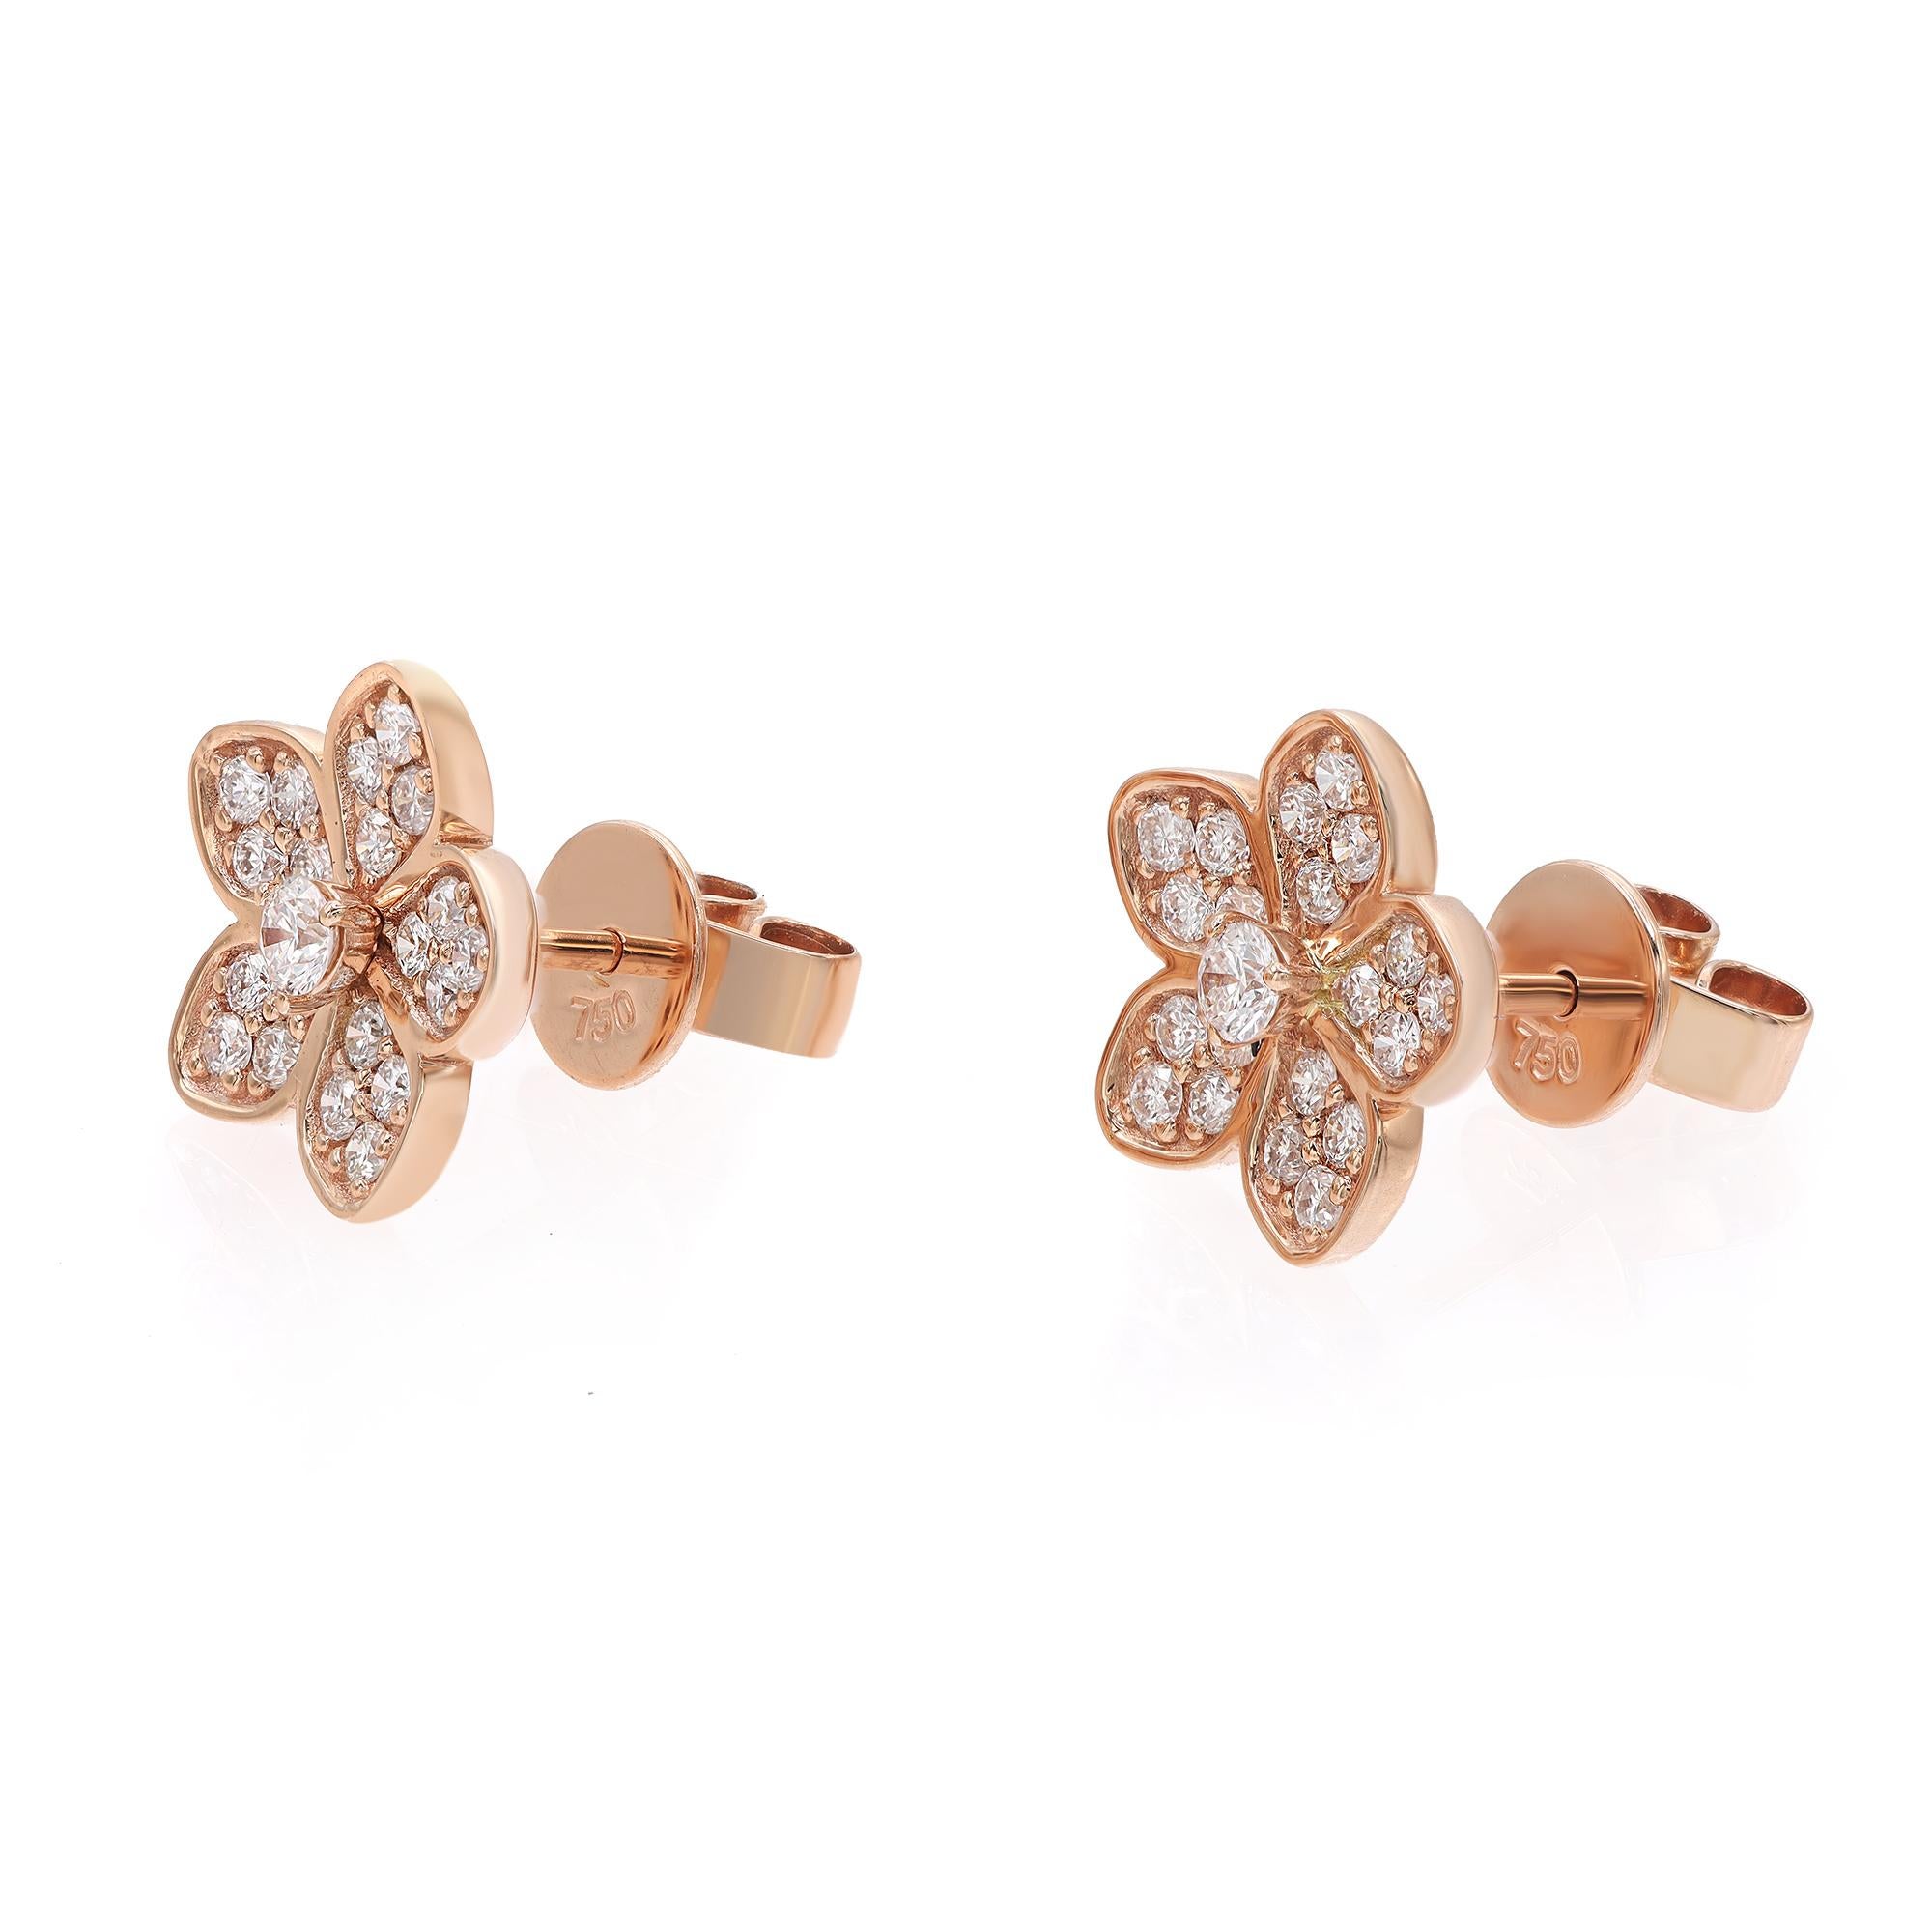 These fanciful flowers are reminiscent of springtime blooms. Featuring diamond flower stud earrings crafted in 18k rose gold. These earrings are encrusted with pave set round brilliant cut diamonds weighing 0.52 ct. Diamond quality: color G-H and